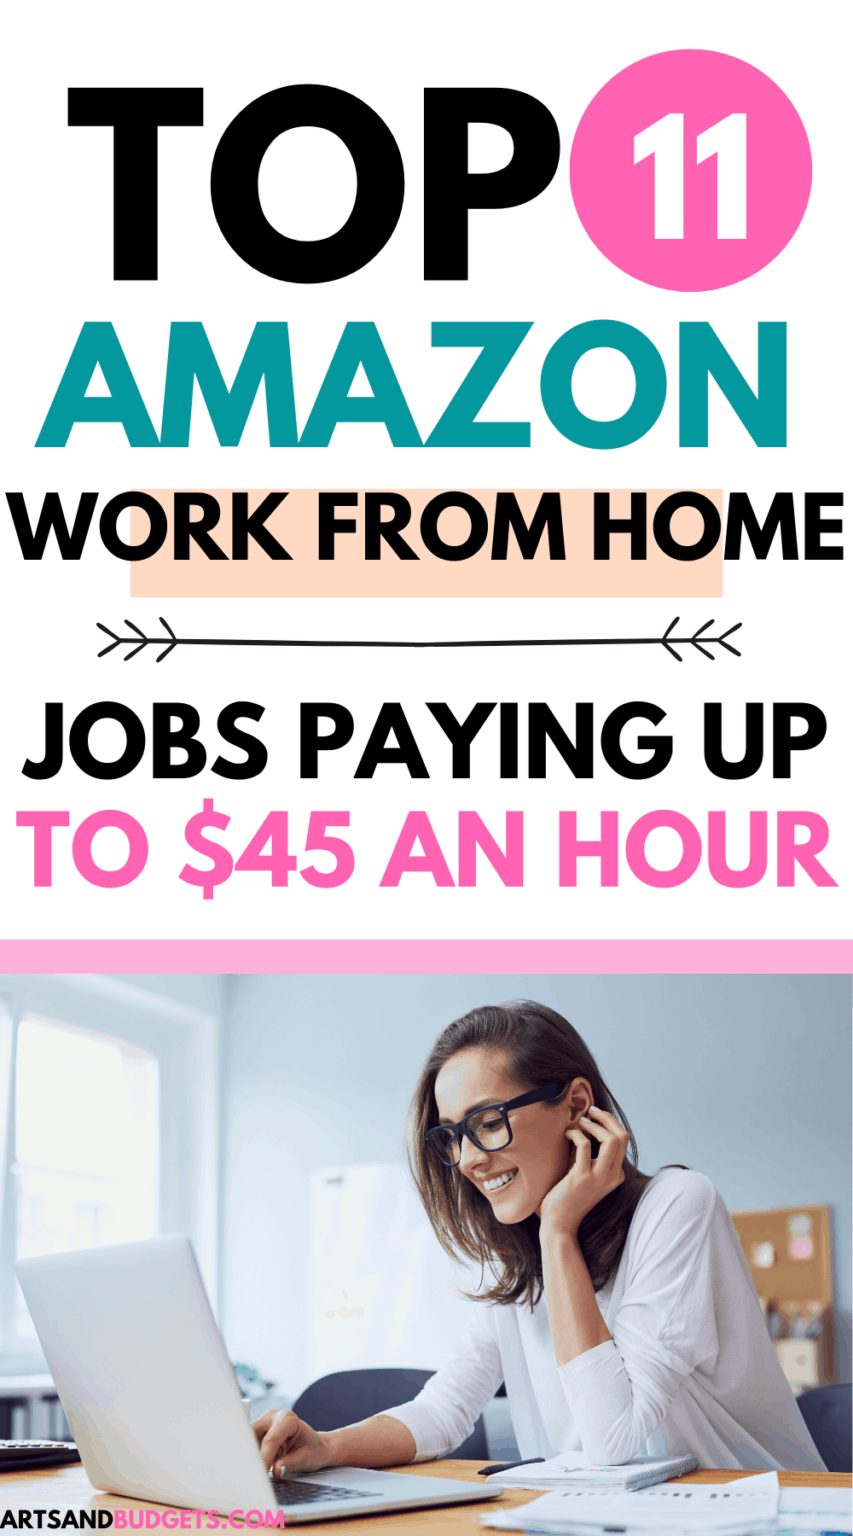 11 Amazon Work From Home Jobs Paying up to $45/hr - Arts and Budgets